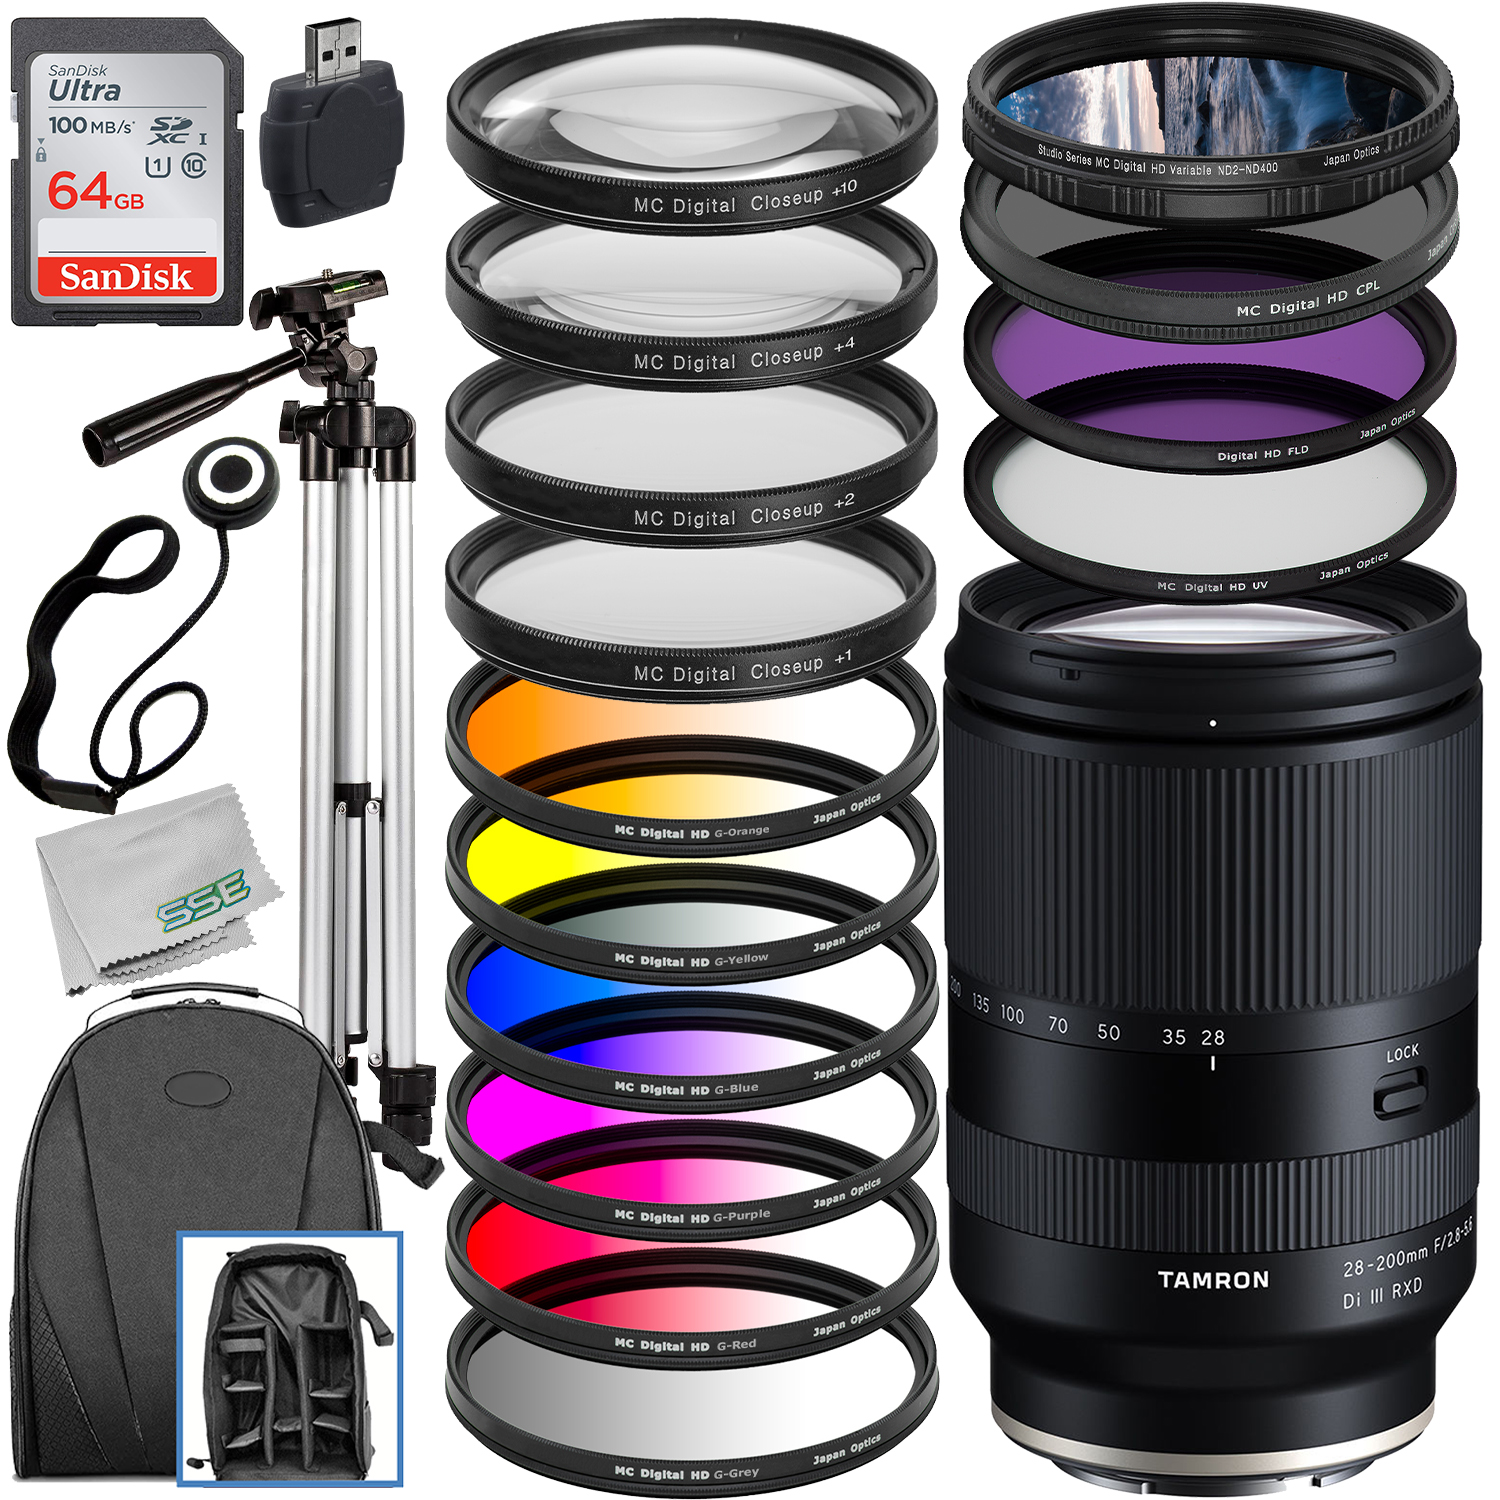 Tamron 28-200mm f/2.8-5.6 Di III RXD Lens for Sony E with Deluxe Accessory Bundle - Includes: SanDisk Ultra 64GB Memory Card, Water Resistant Backpack, Lightweight Tripod, 14PC Filter Kits & Much More